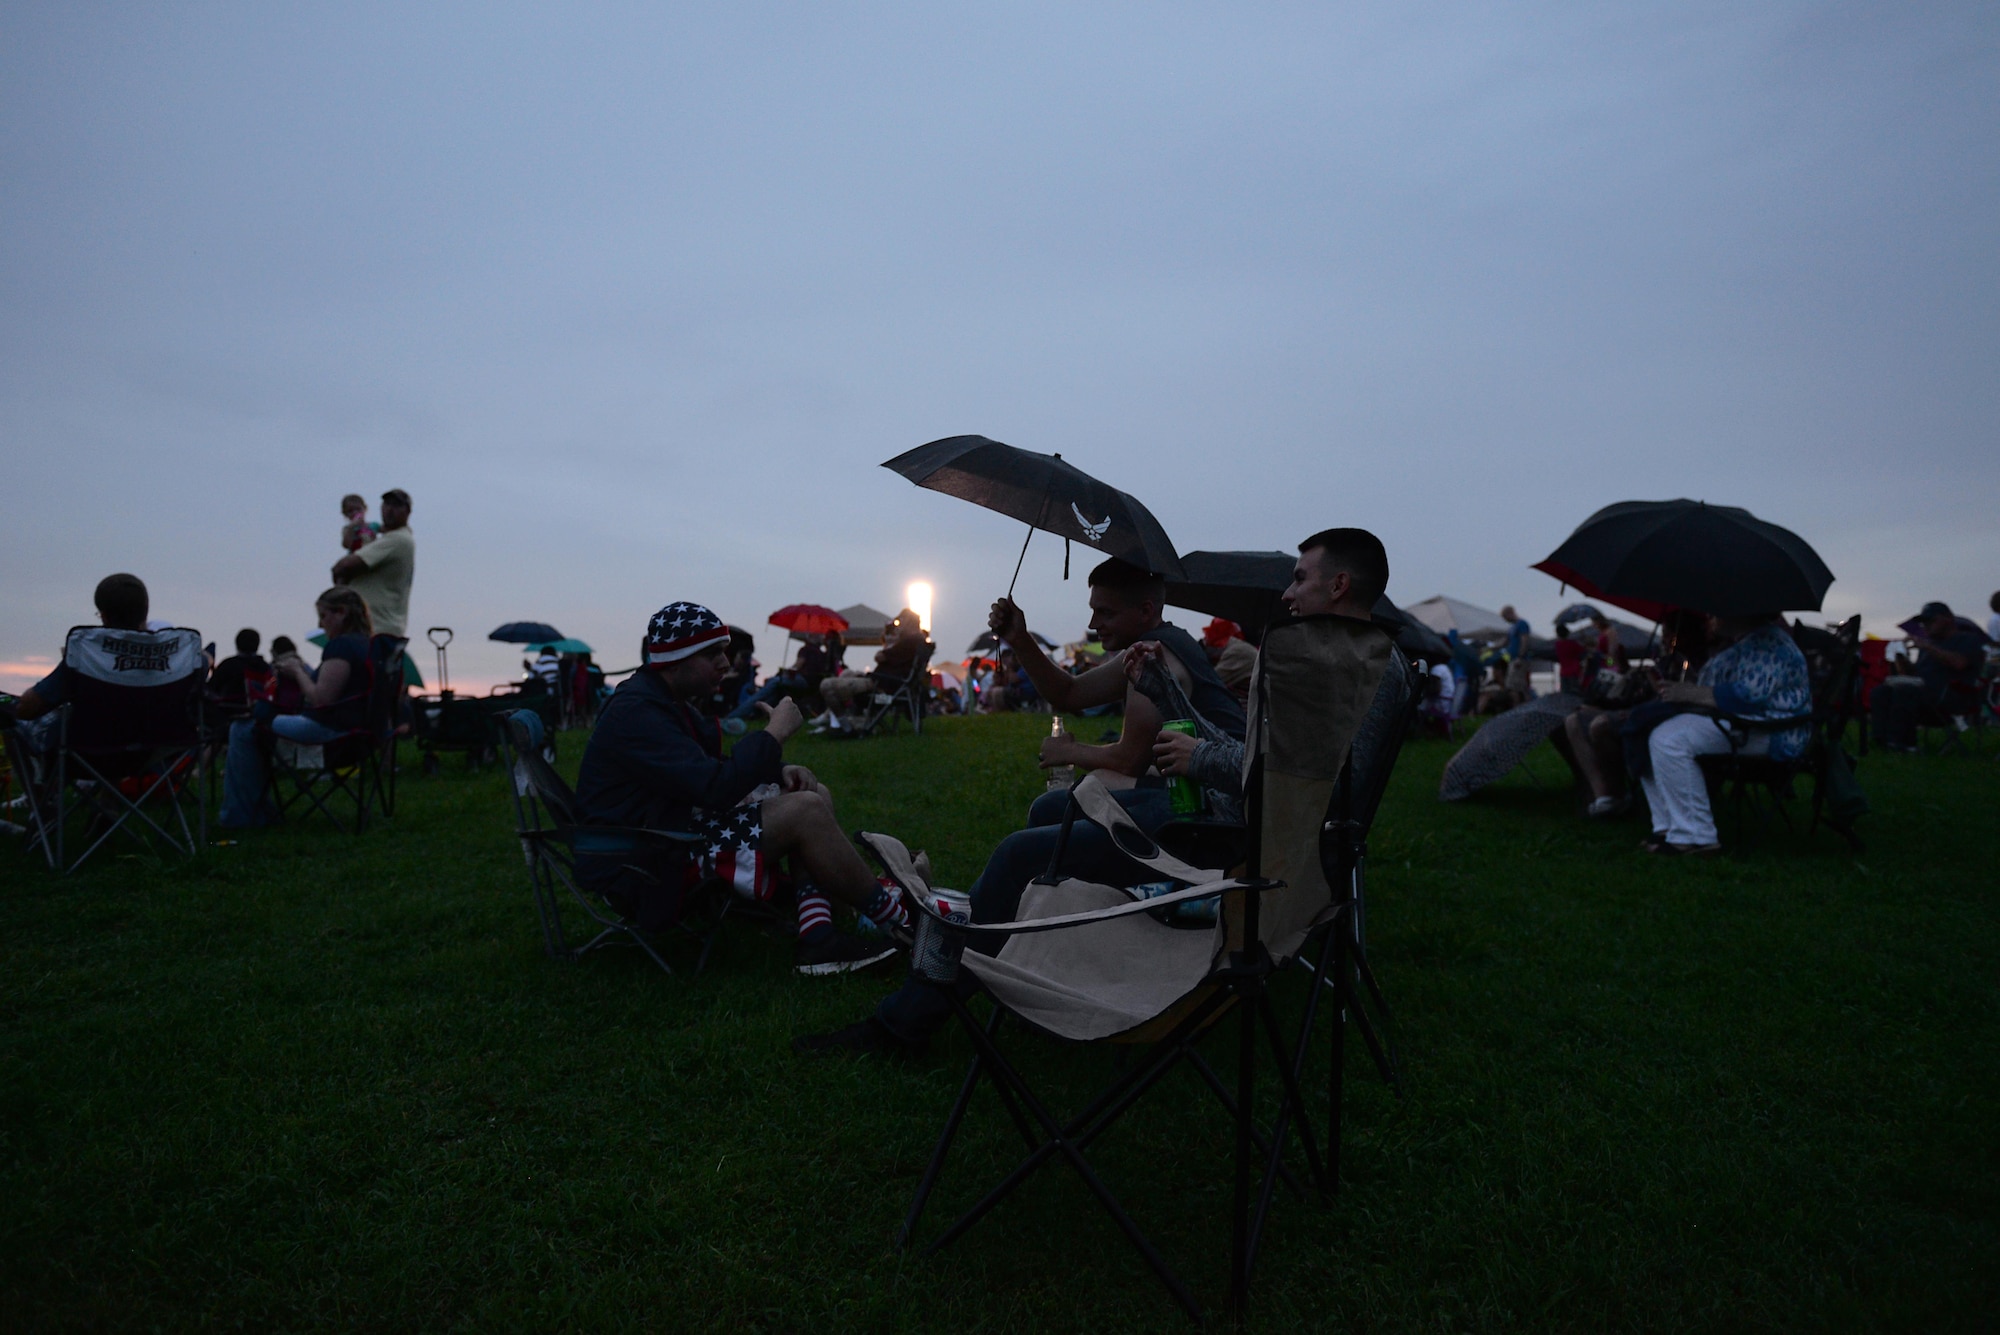 Family and friends gather as the sun sets during Fireworks on the Water July 1, 2017, at the Stennis Lock and Dam in Columbus, Mississippi. People stayed entertained by the bouncy obstacle courses, tossing footballs, talking with friends or vendors and dancing to music being played from the stage’s pre-made playlist.